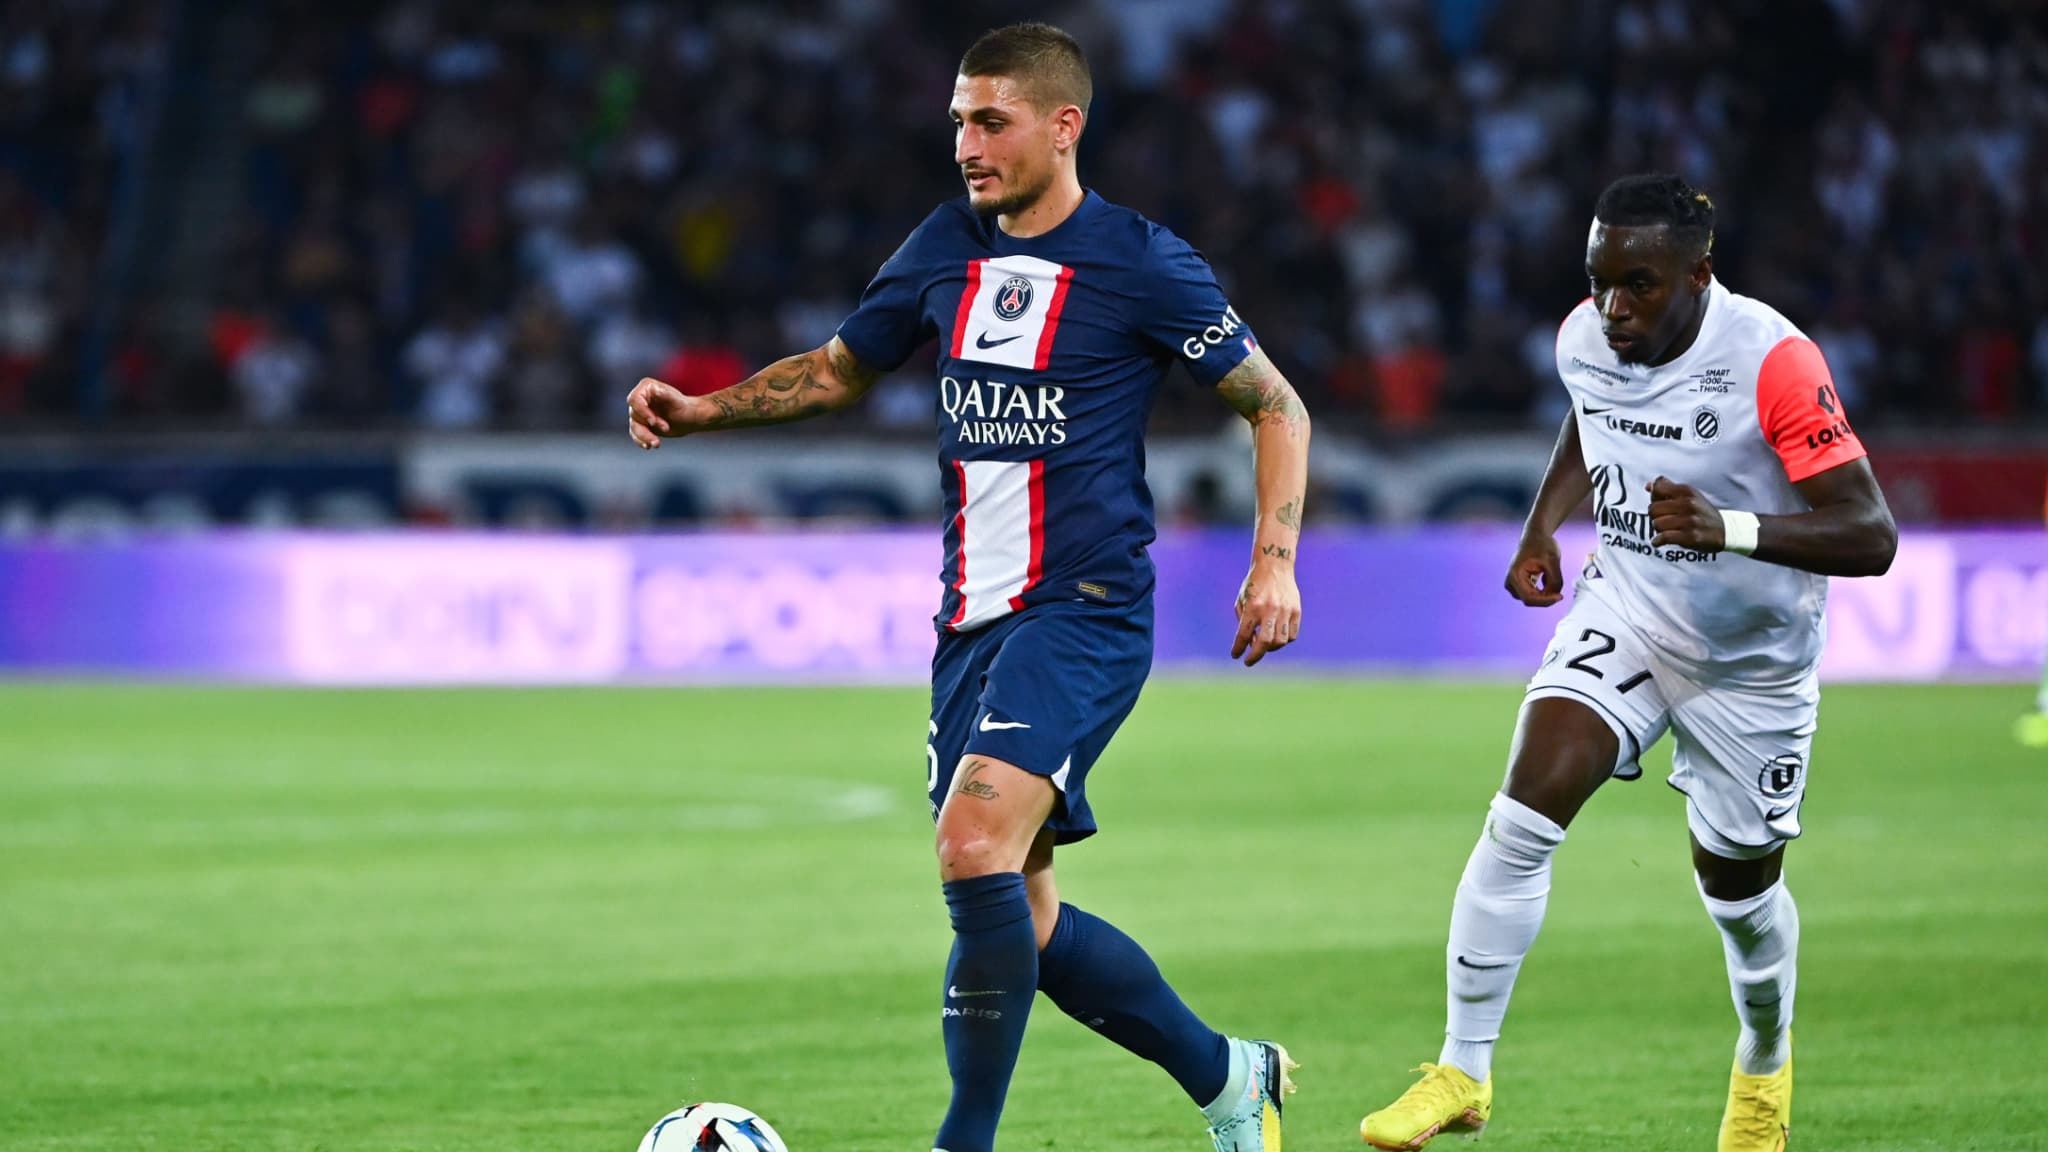 “Vitinha took my place,” Verratti laughs at his new teammate’s yellow cards